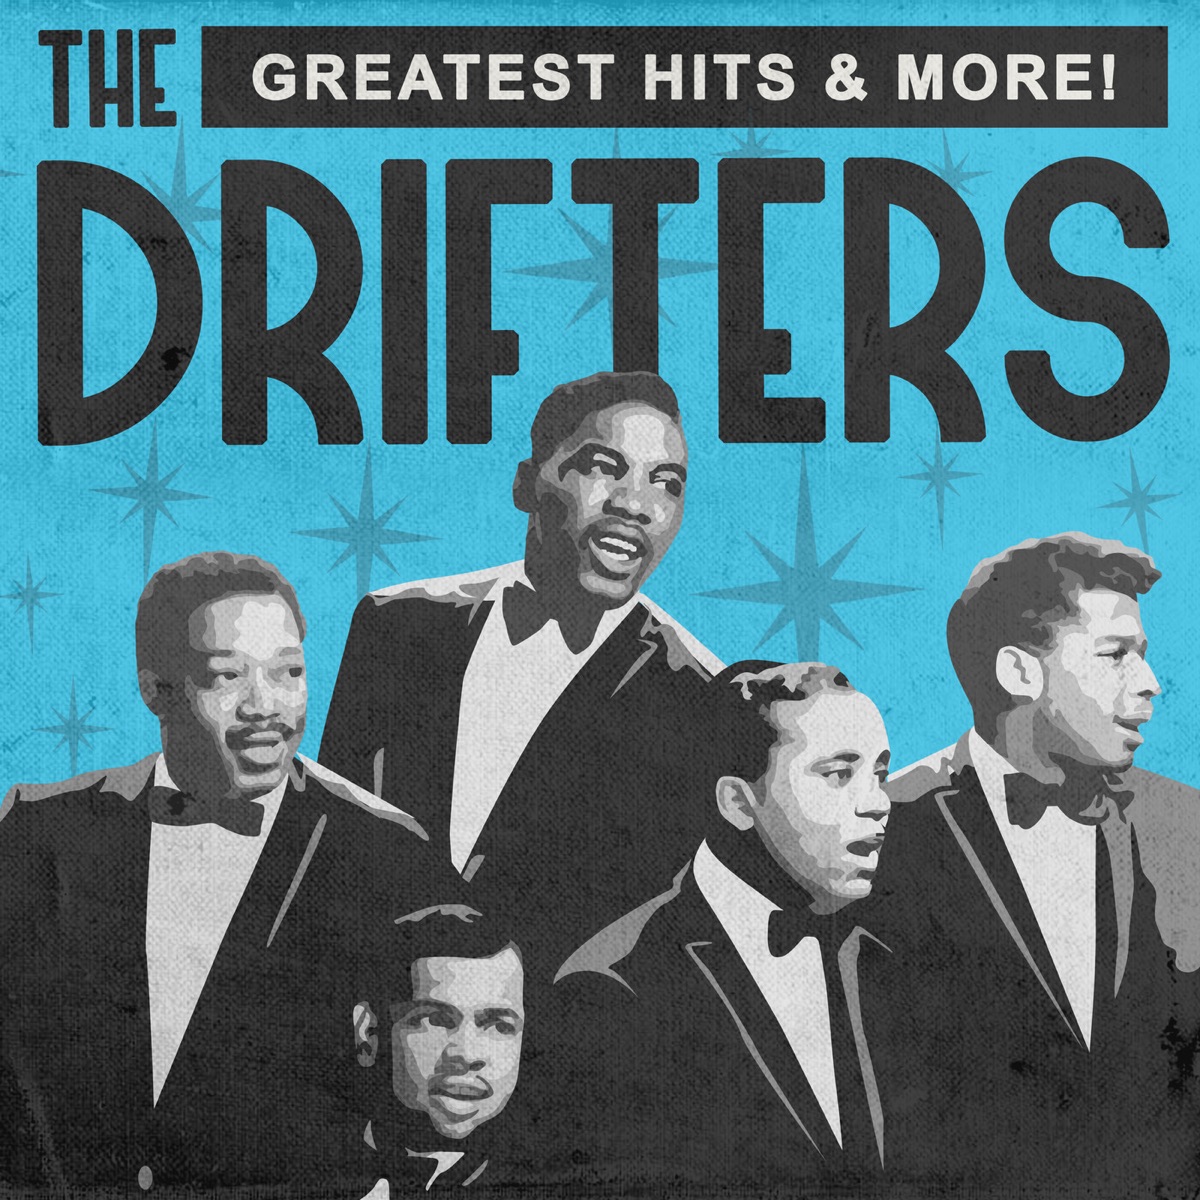 The Essentials: The Drifters - Album by The Drifters - Apple Music